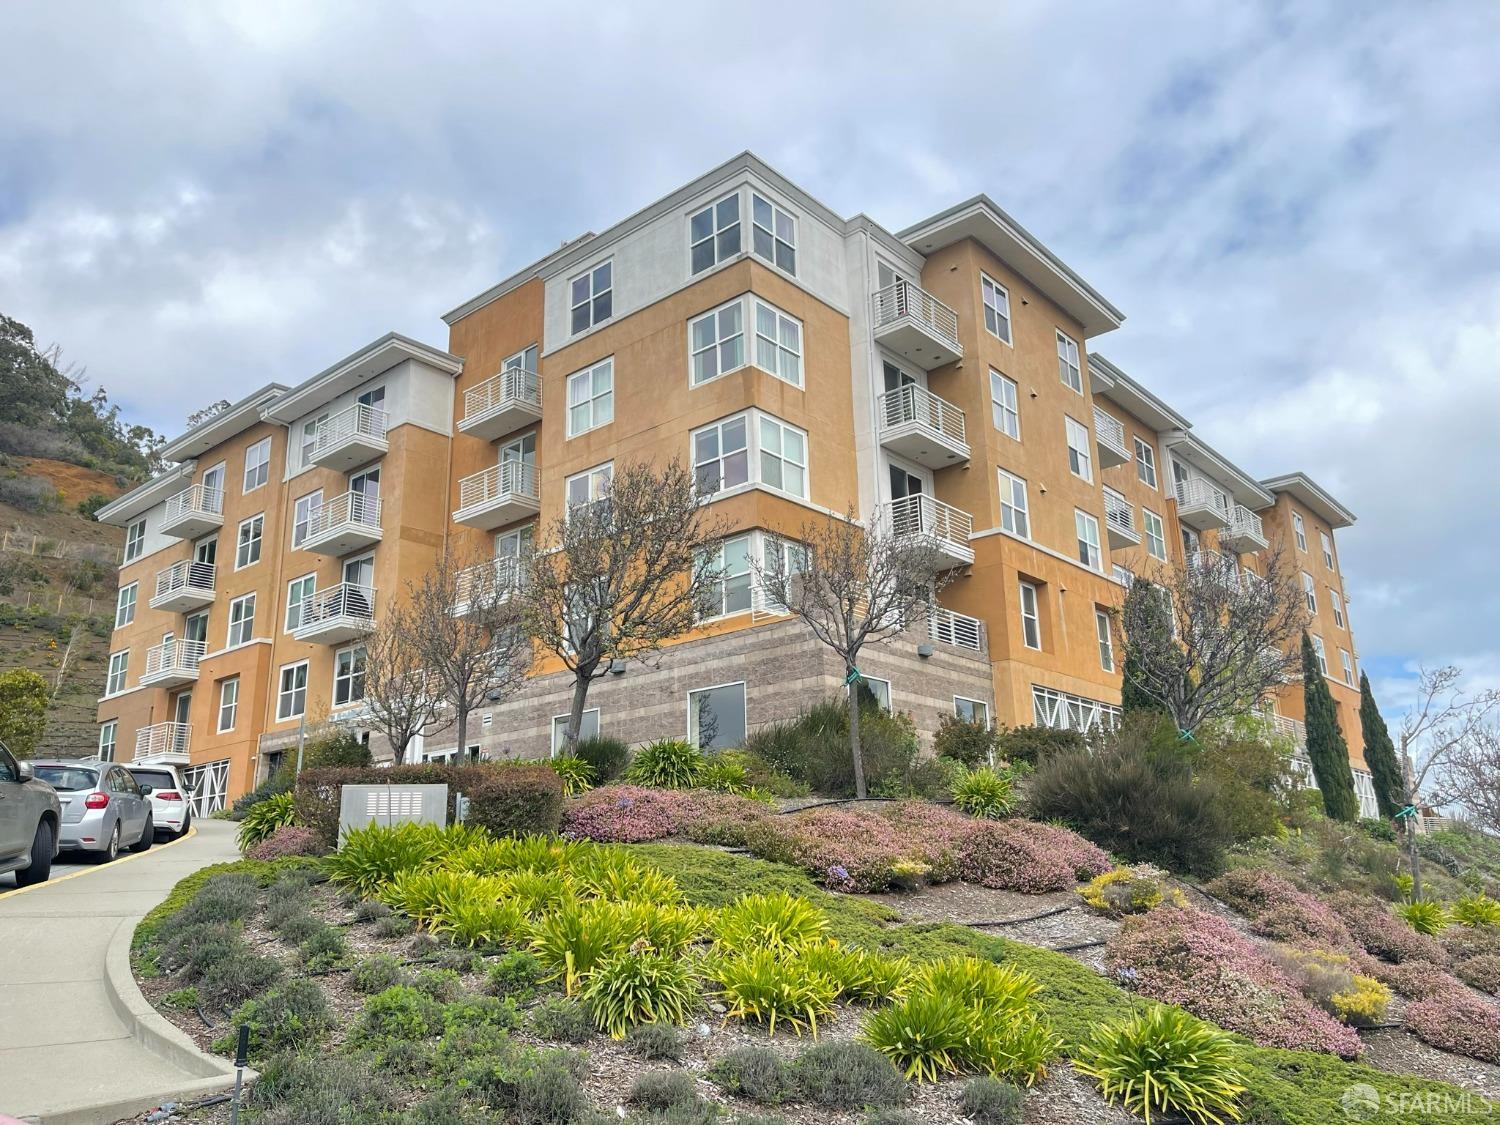 Photo of 501 Crescent Wy #5303 in San Francisco, CA